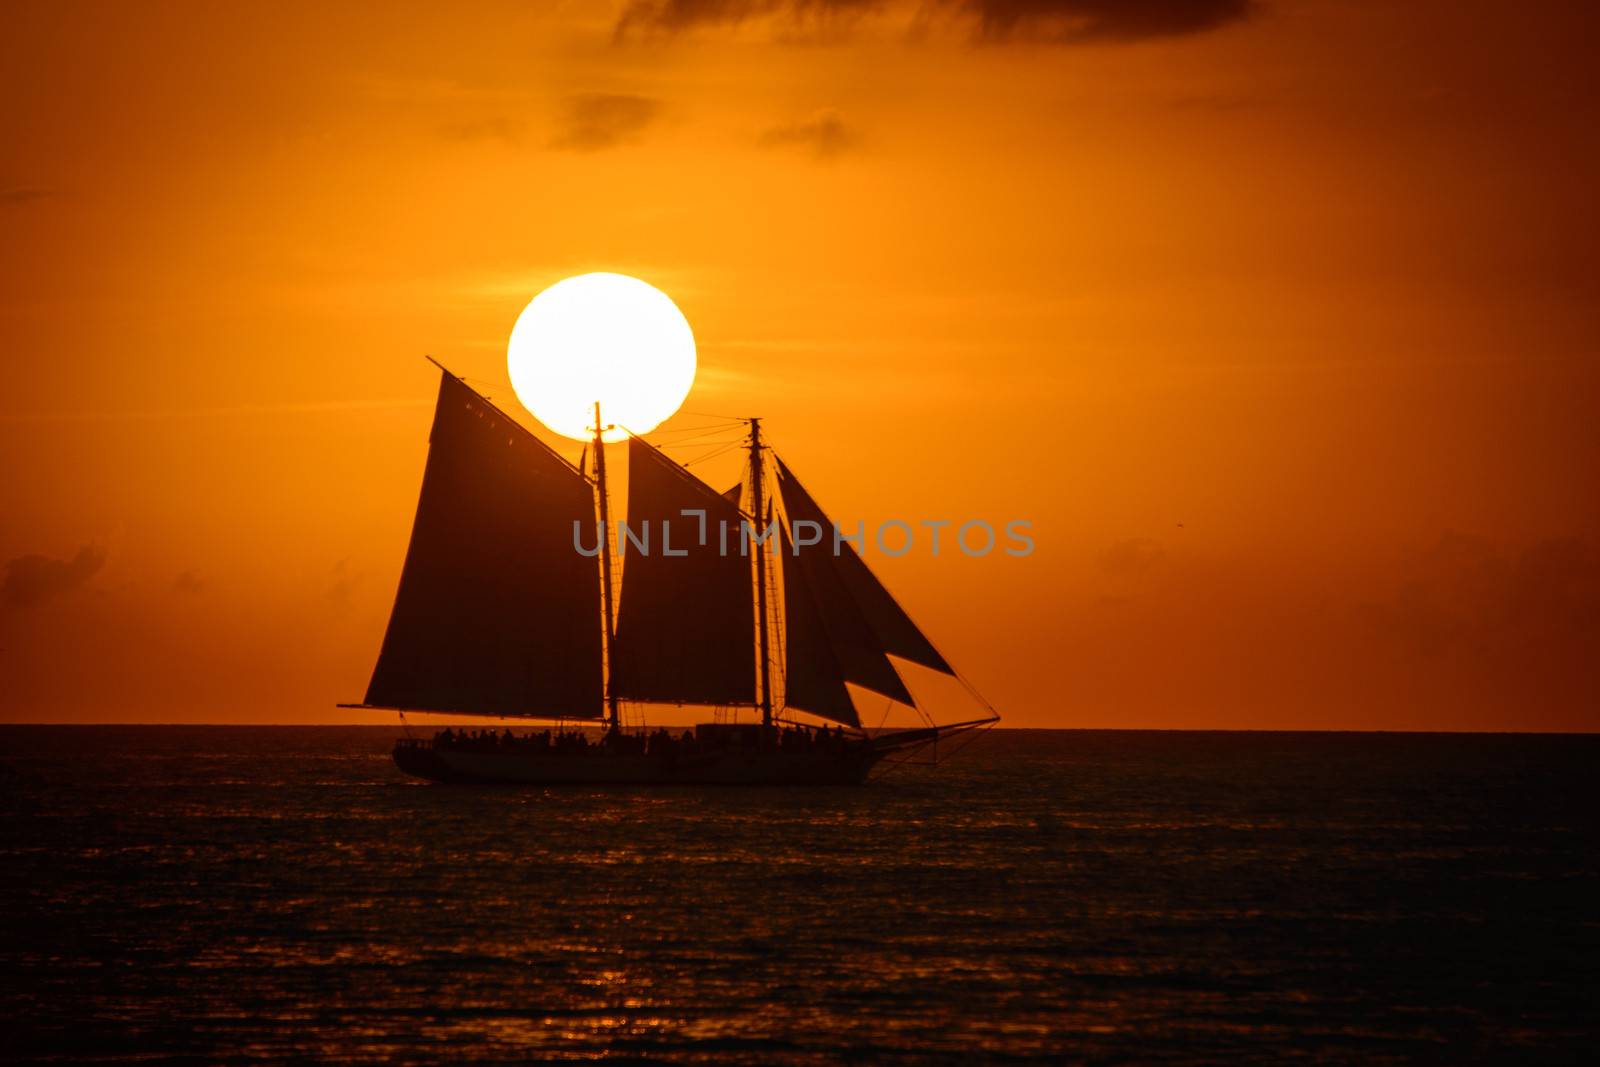 Silhouette of sailing ship in the Atlantic ocean, Key West, Monroe County, Florida, USA